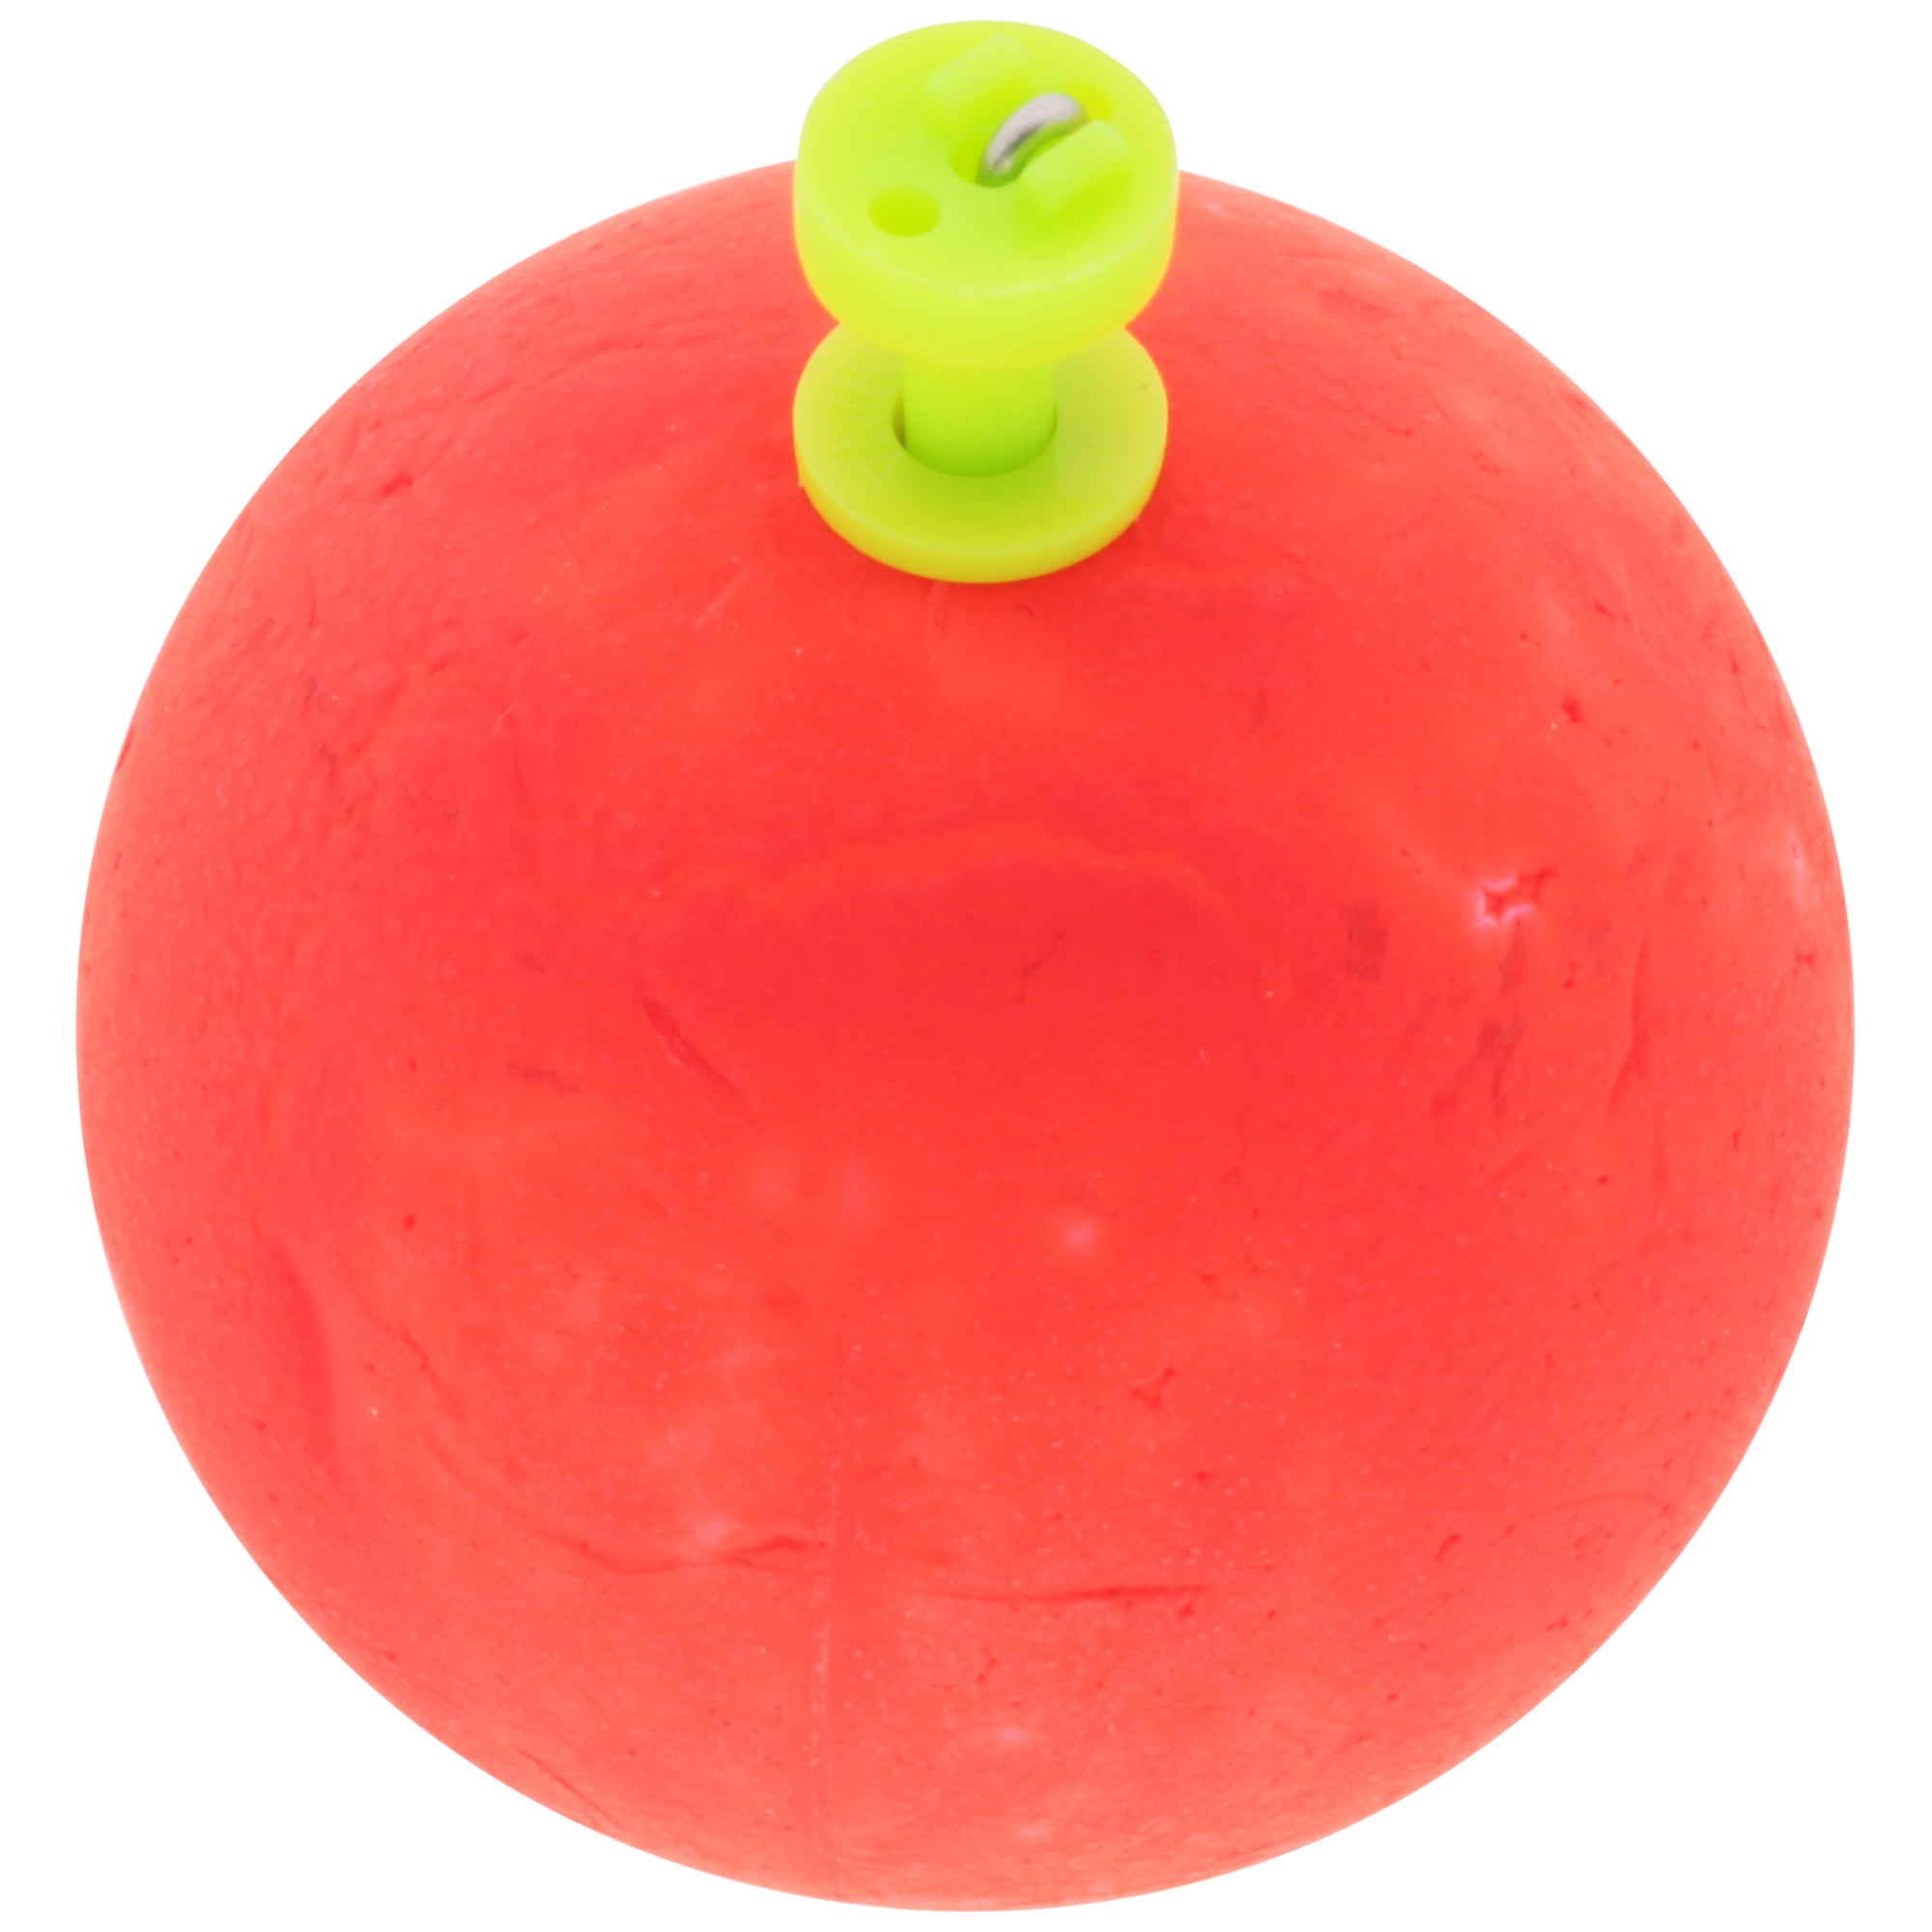 12 1 FISHING BOBBERS Small Round Floats Weighted Foam Snap on Float Choice